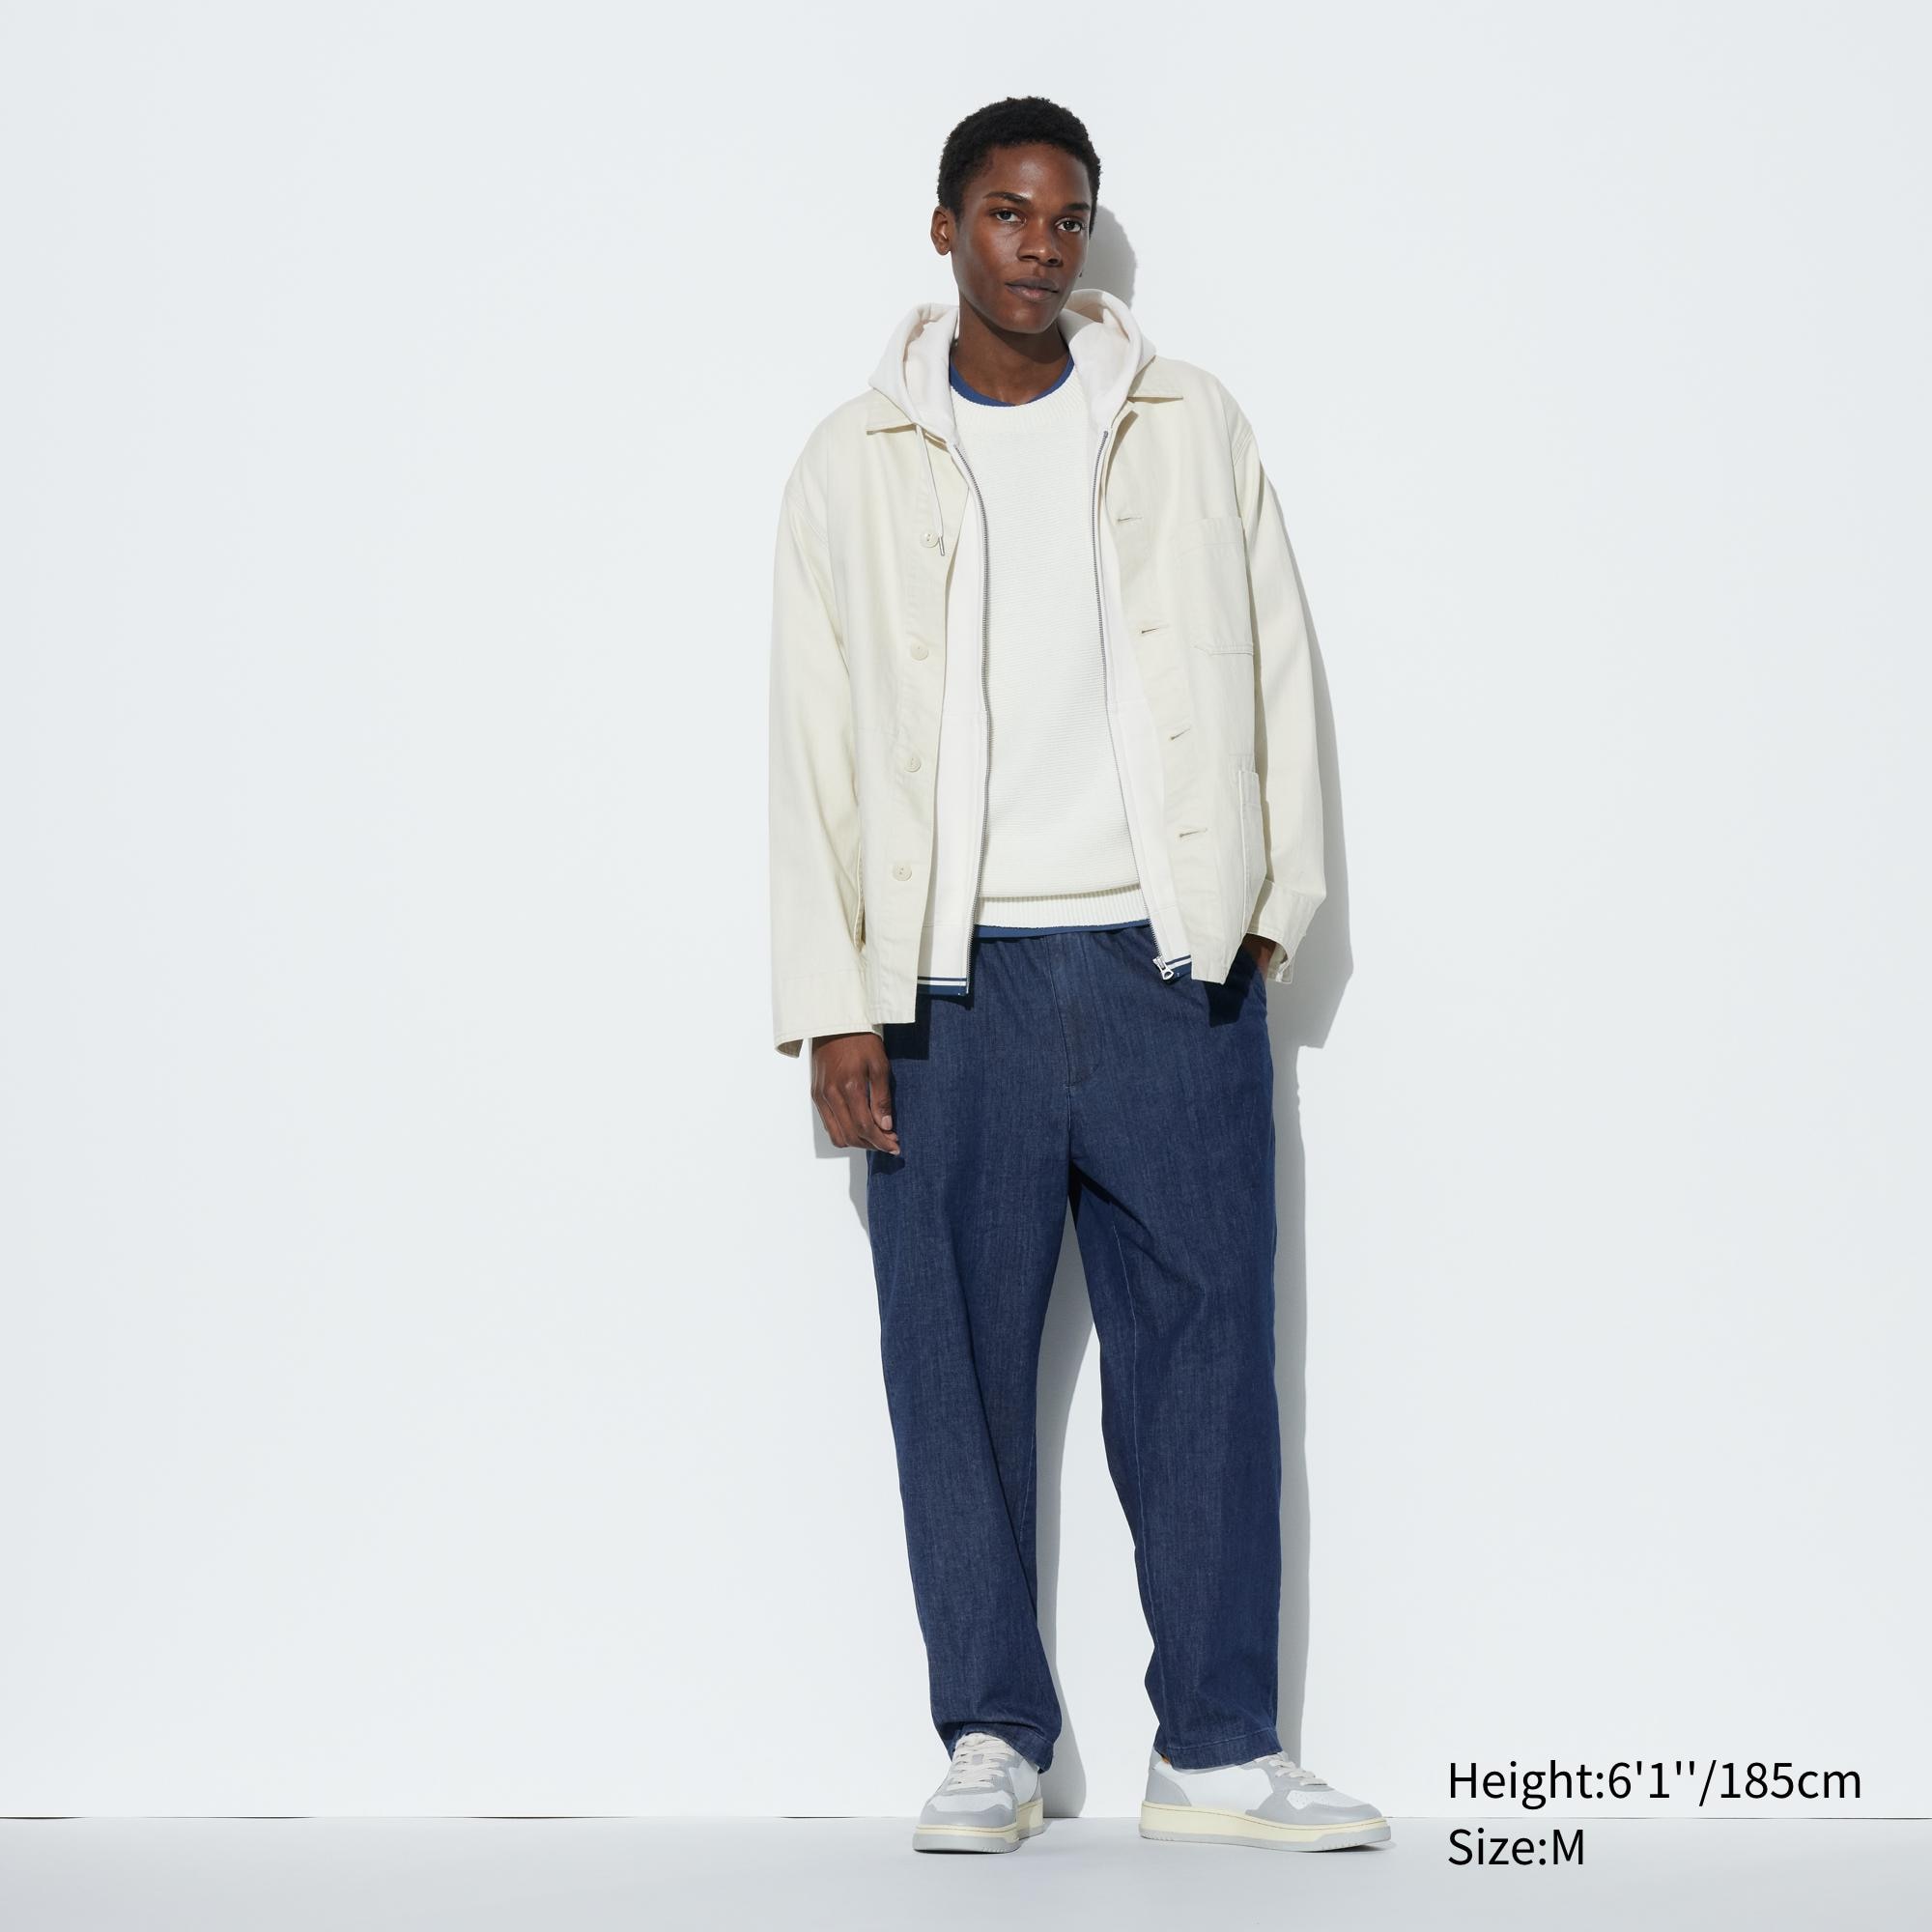 Cotton Relaxed Ankle Pants (Denim) | UNIQLO US